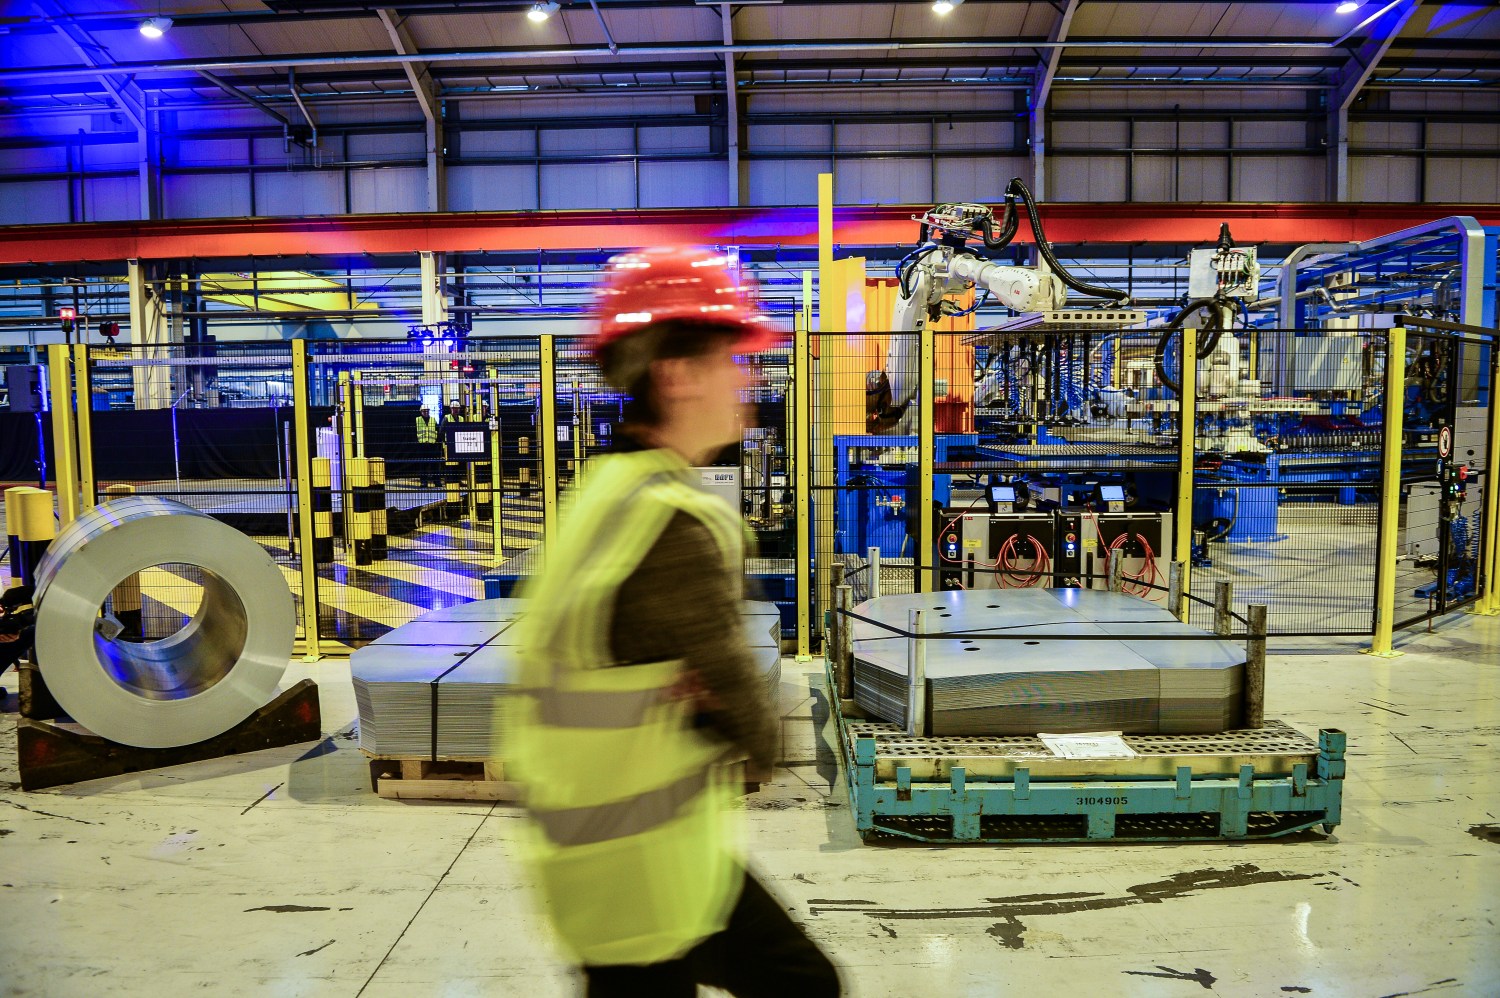 A worker walk spast a Wisco Lasertechnik robotic automated production line at the automotive service centre at Tata Steel's Wednesbury site in Willenhall, Wolverhampton. PRESS ASSOCIATION Photo. Picture date: Wednesday February 15, 2017. Photo credit should read: Ben Birchall